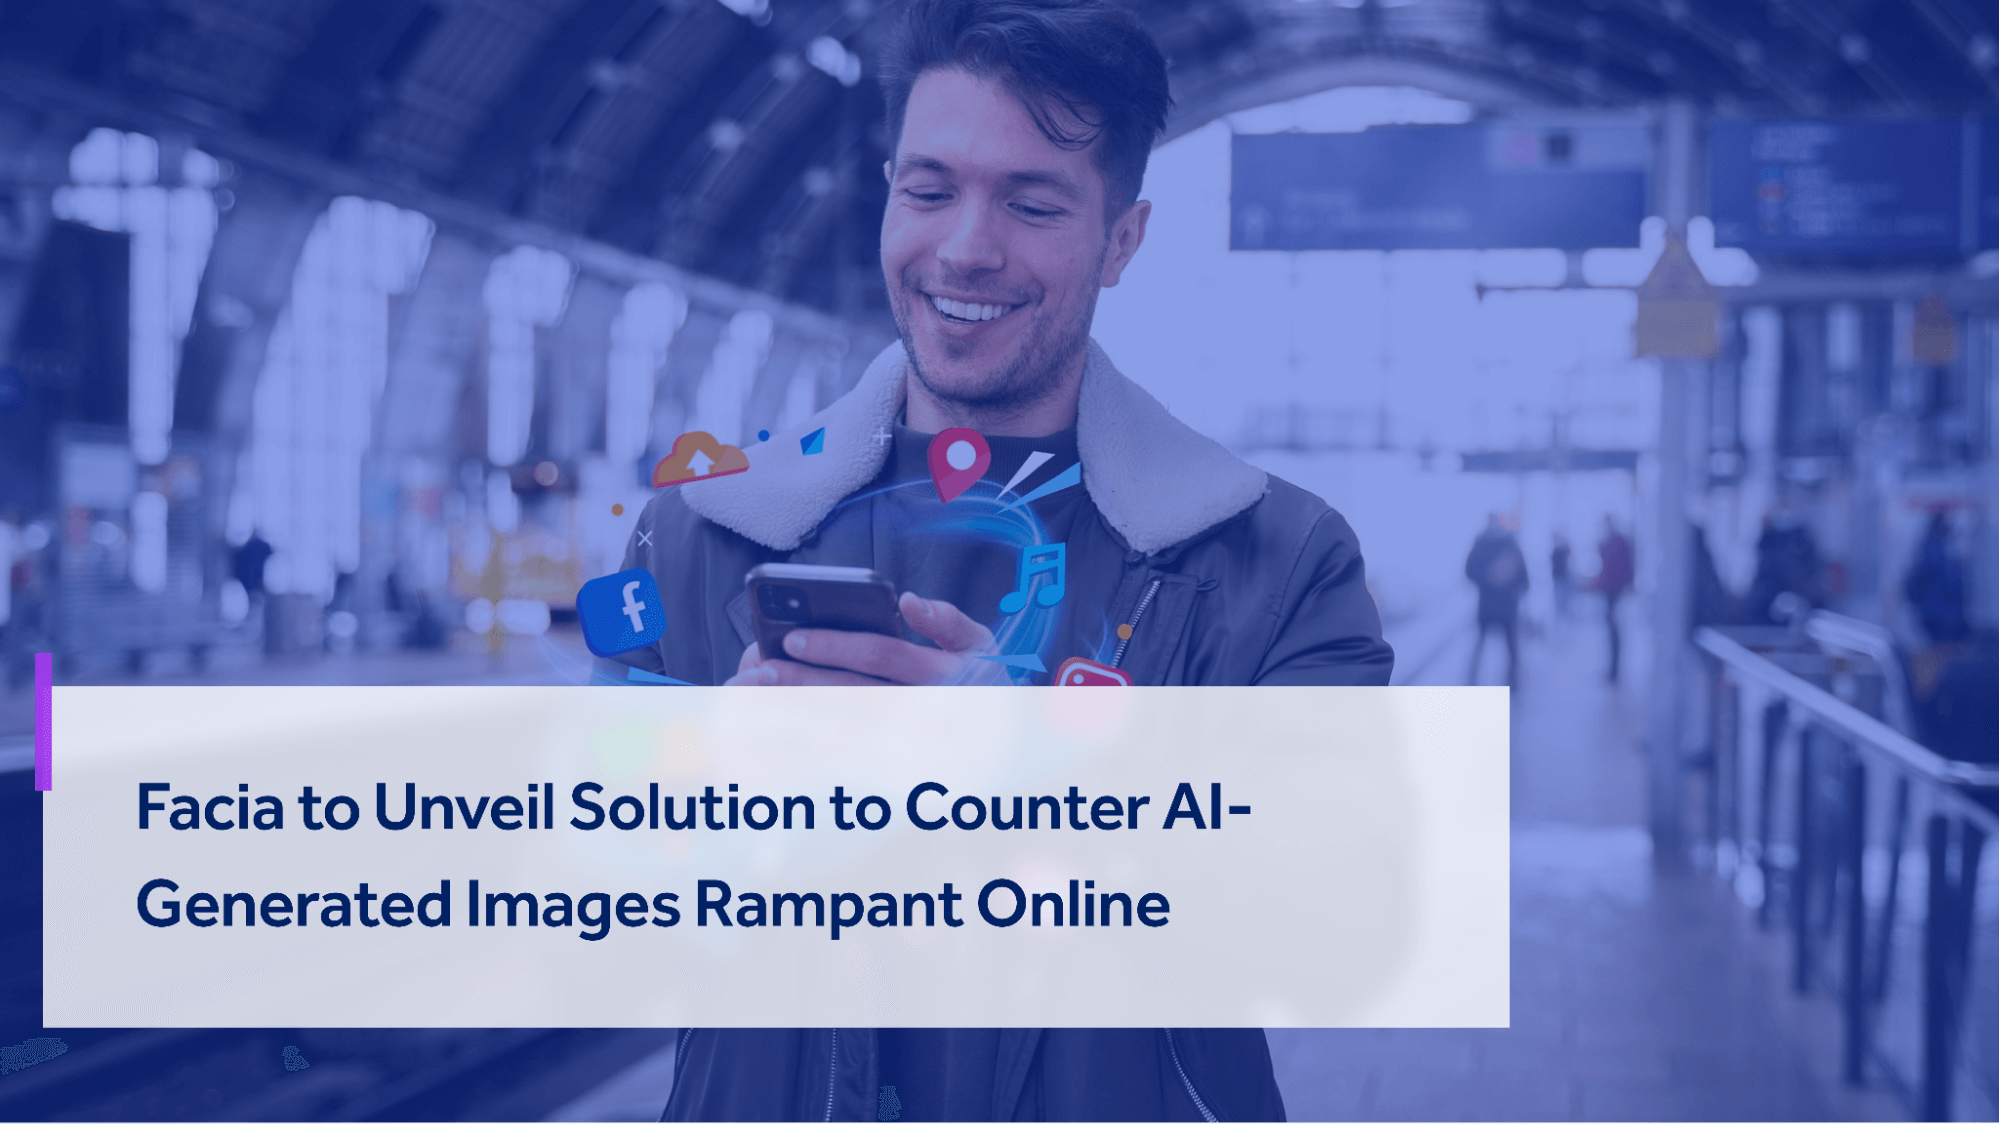 Facia to unveil solution for effective AI-images and deepfake detection on online platforms and social media.